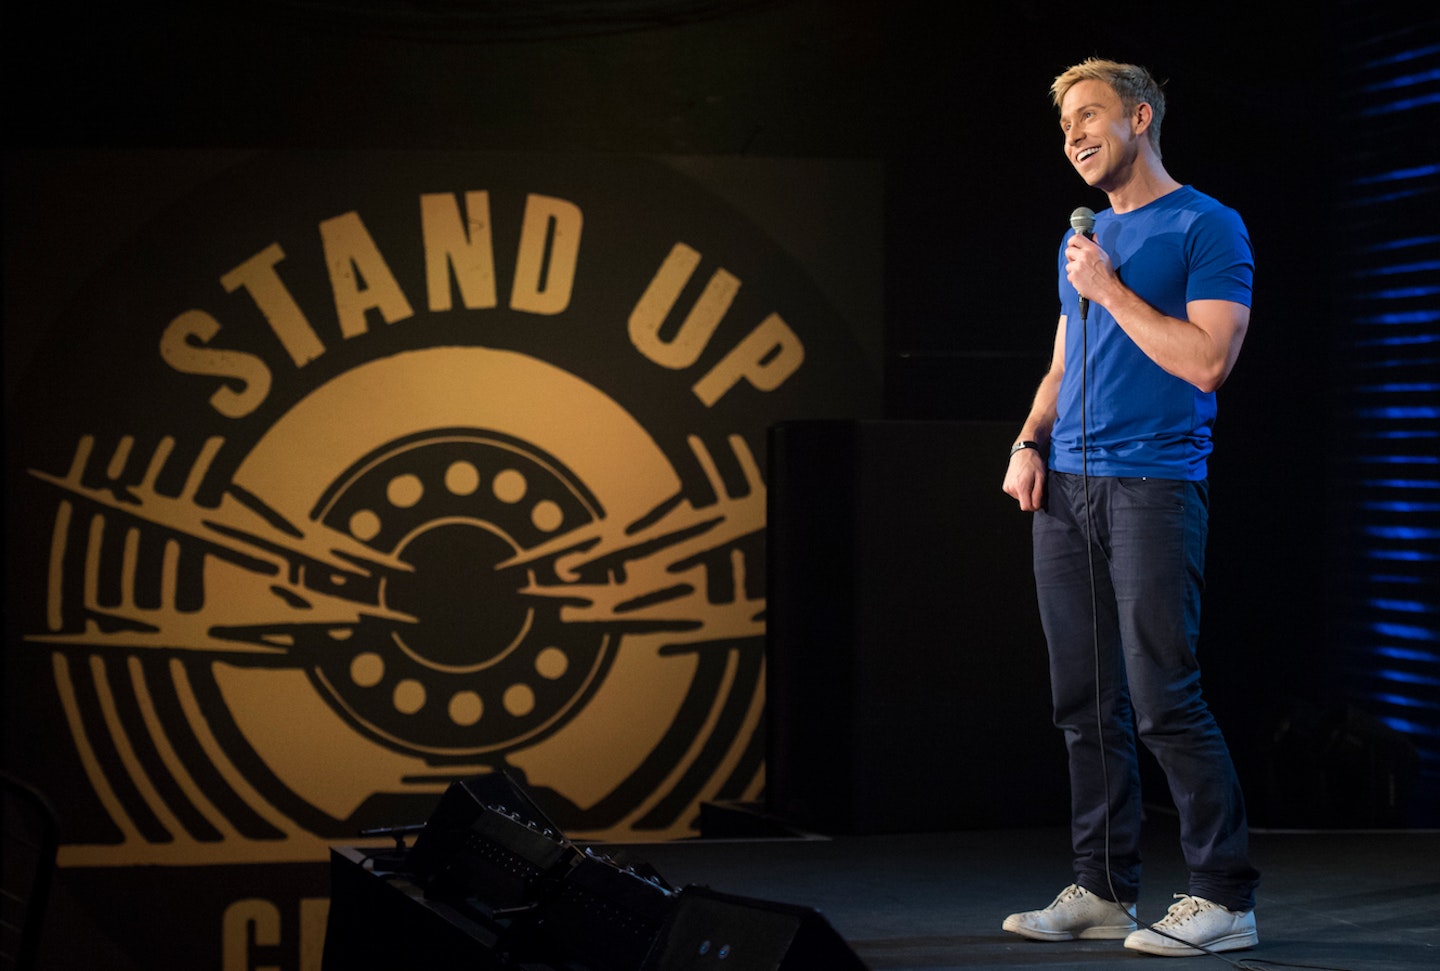 Russell Howard's show has returned to Comedy Central for a second series